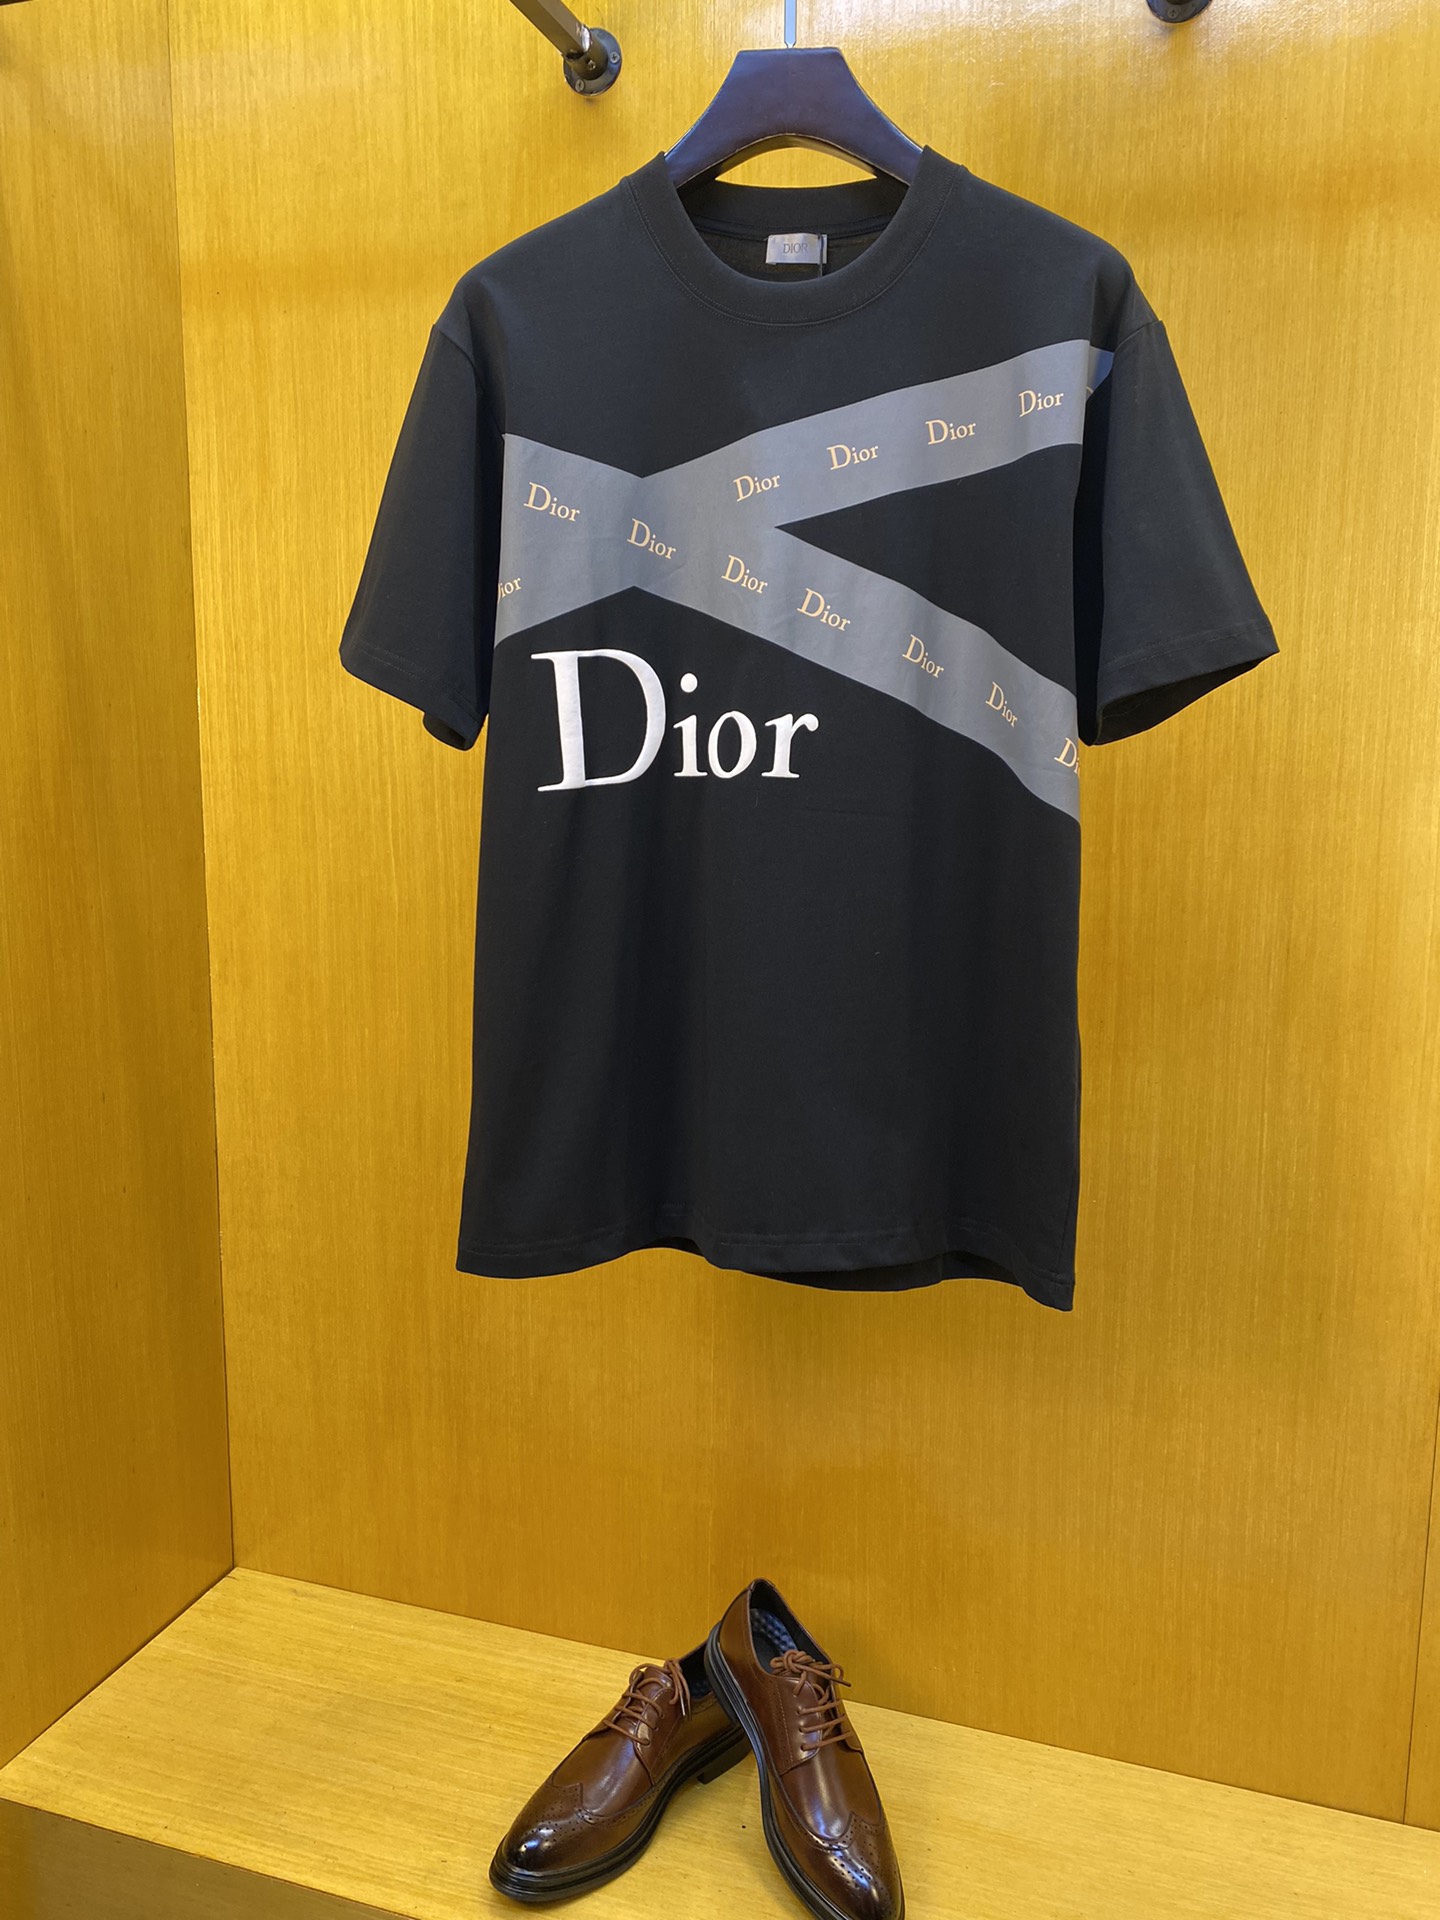 Dior Clothing T-Shirt Cotton Spring/Summer Collection Fashion Short Sleeve